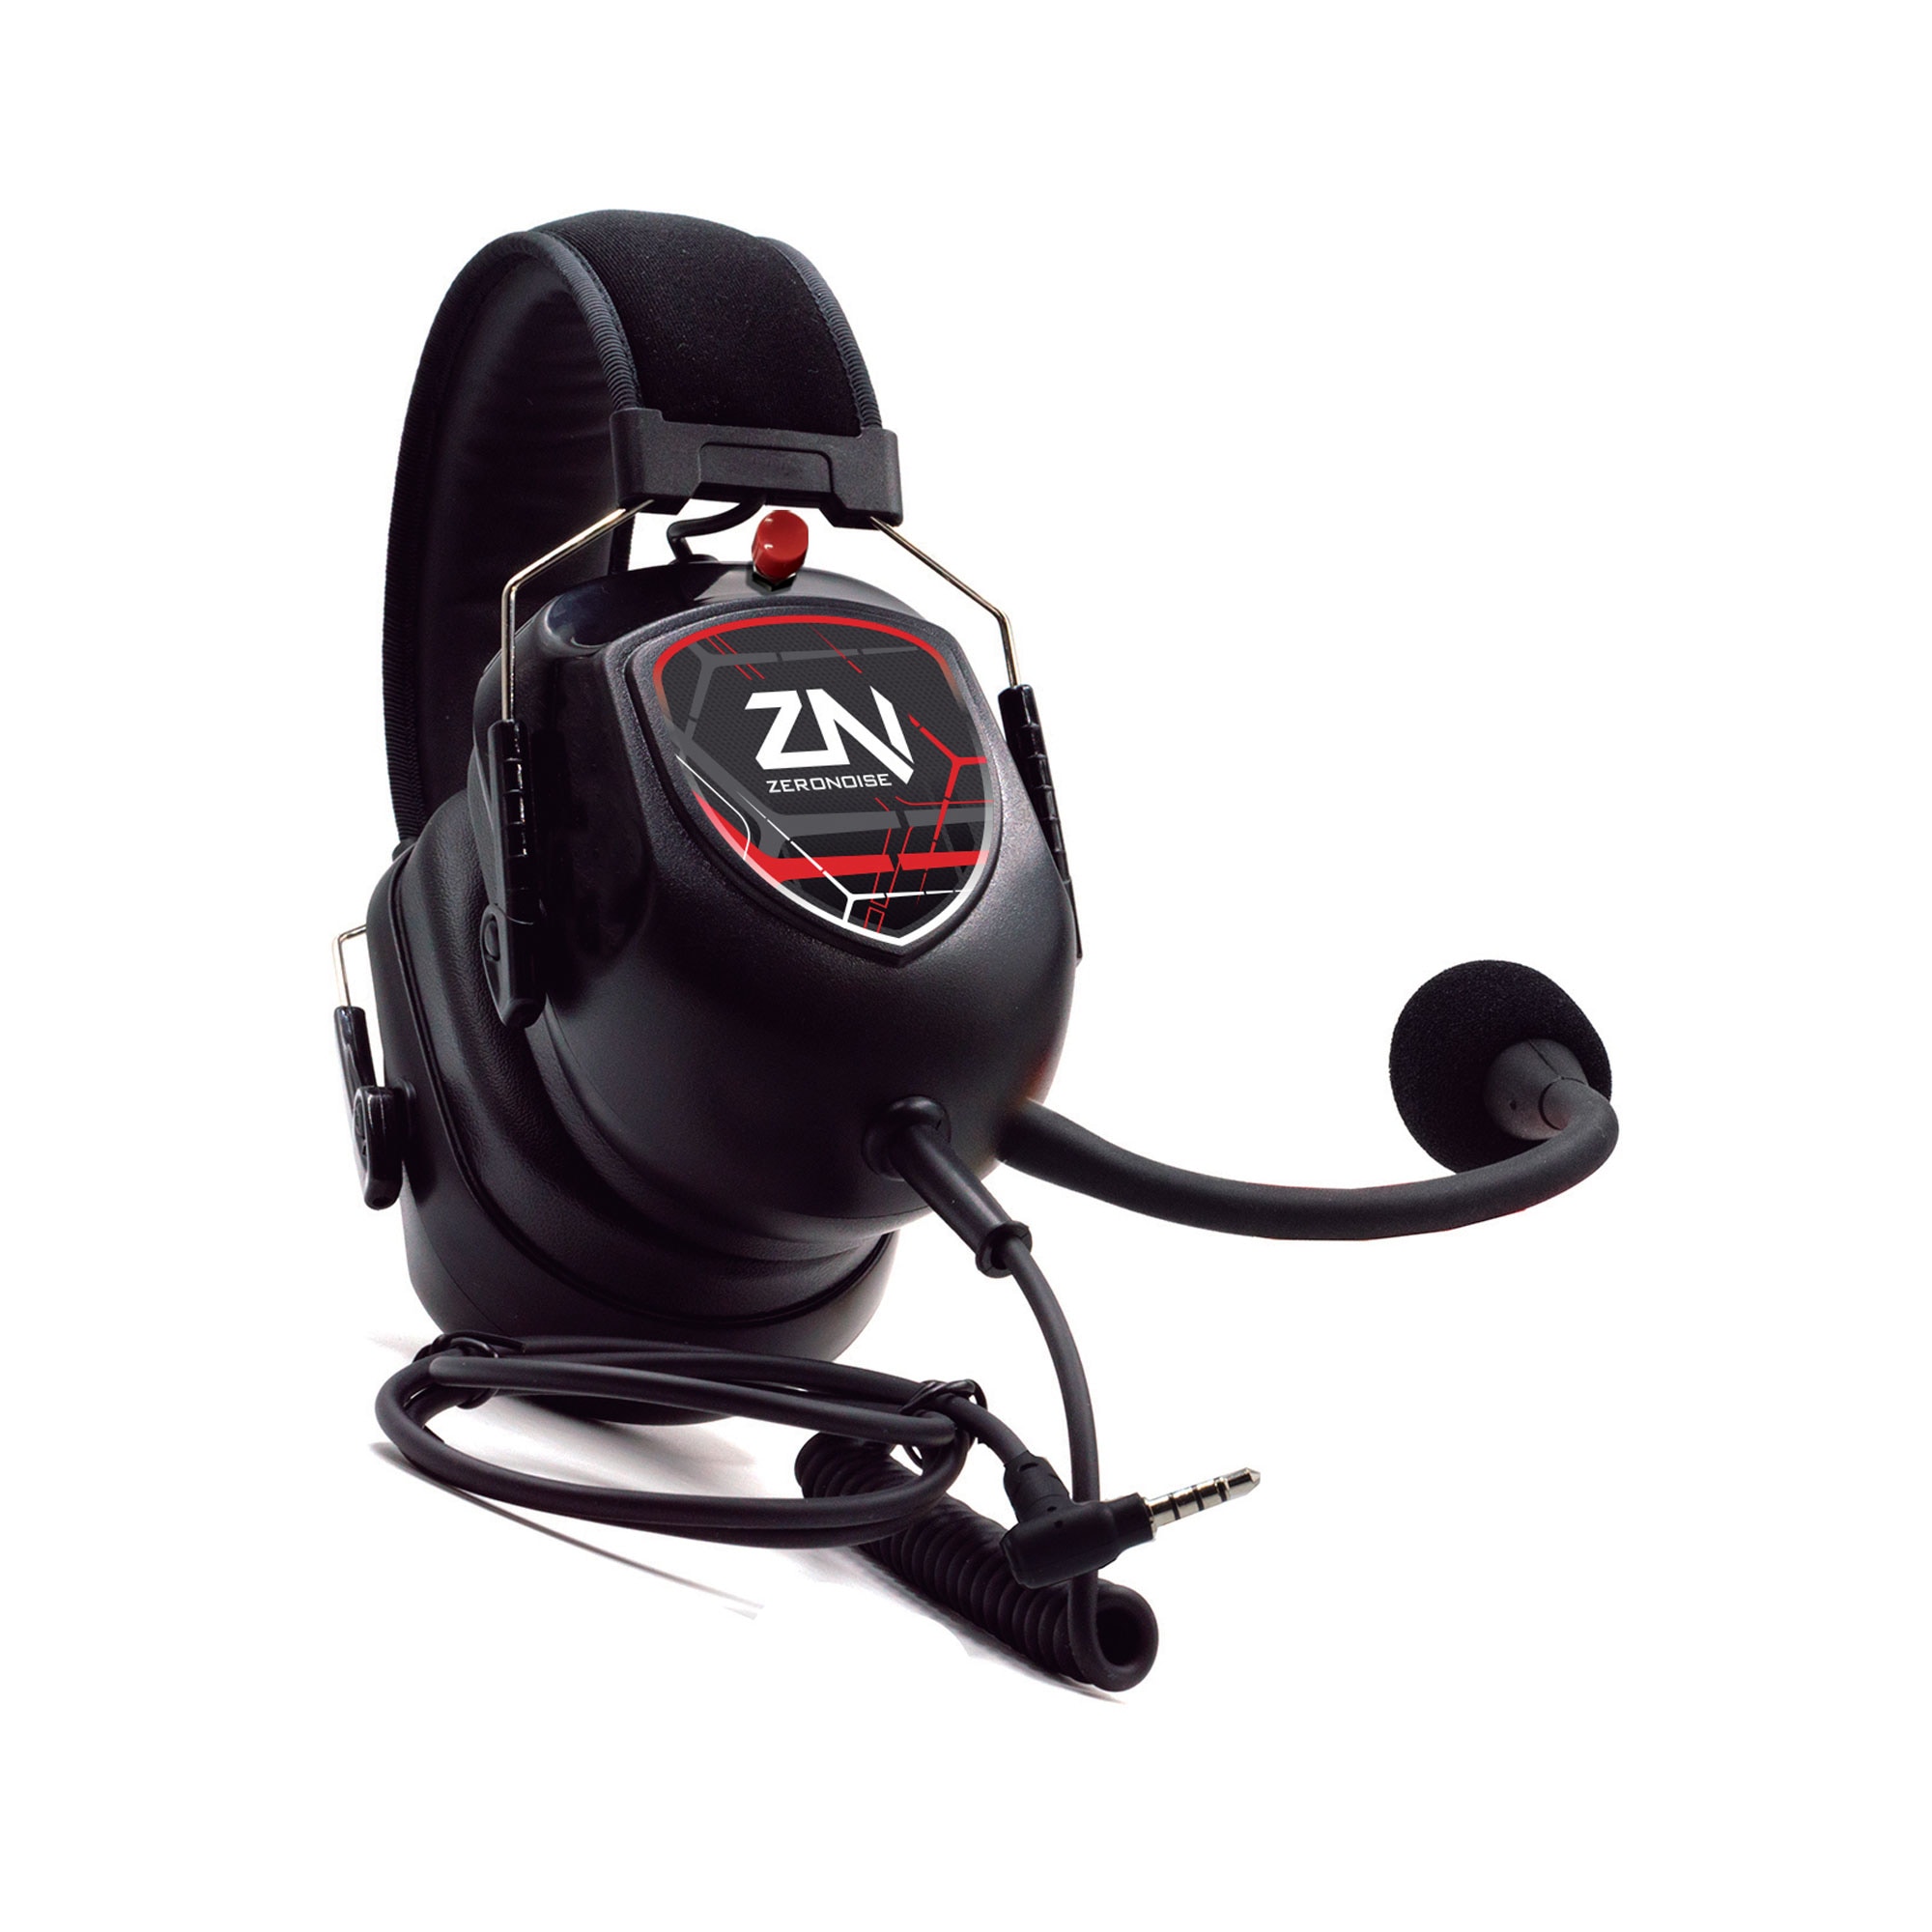 Pit Link Trainer ZN Professional Karting Interom System (Android)